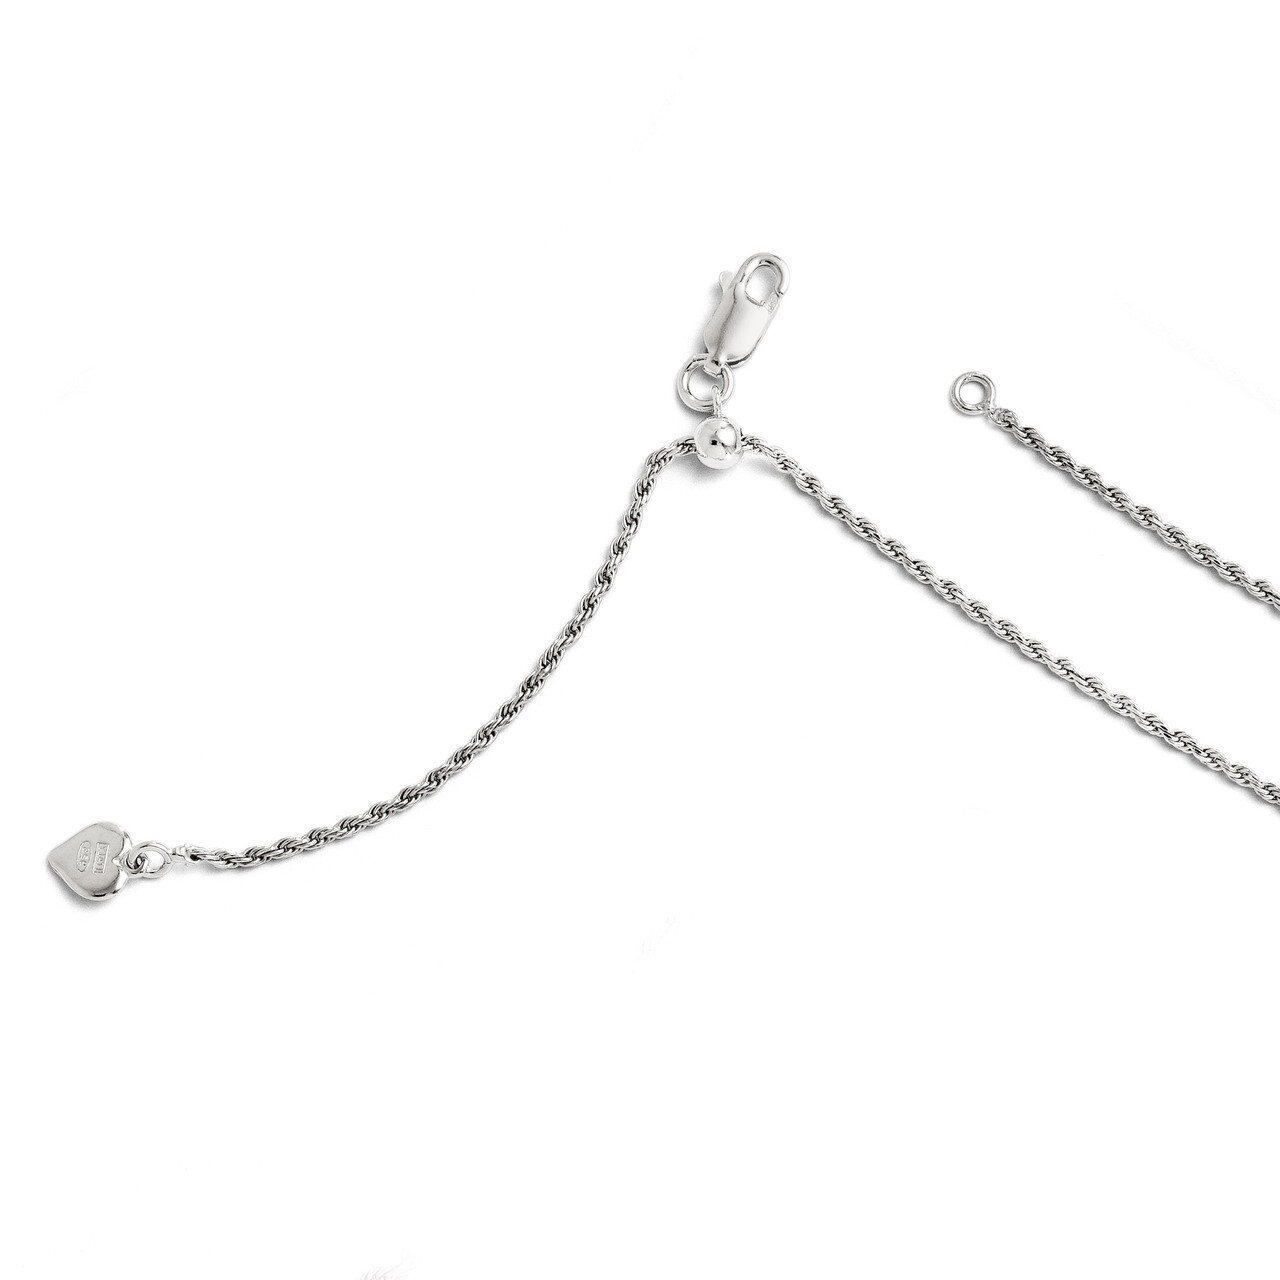 Adjustable Rope Chain 30 Inch - Sterling Silver HB-FC14-30